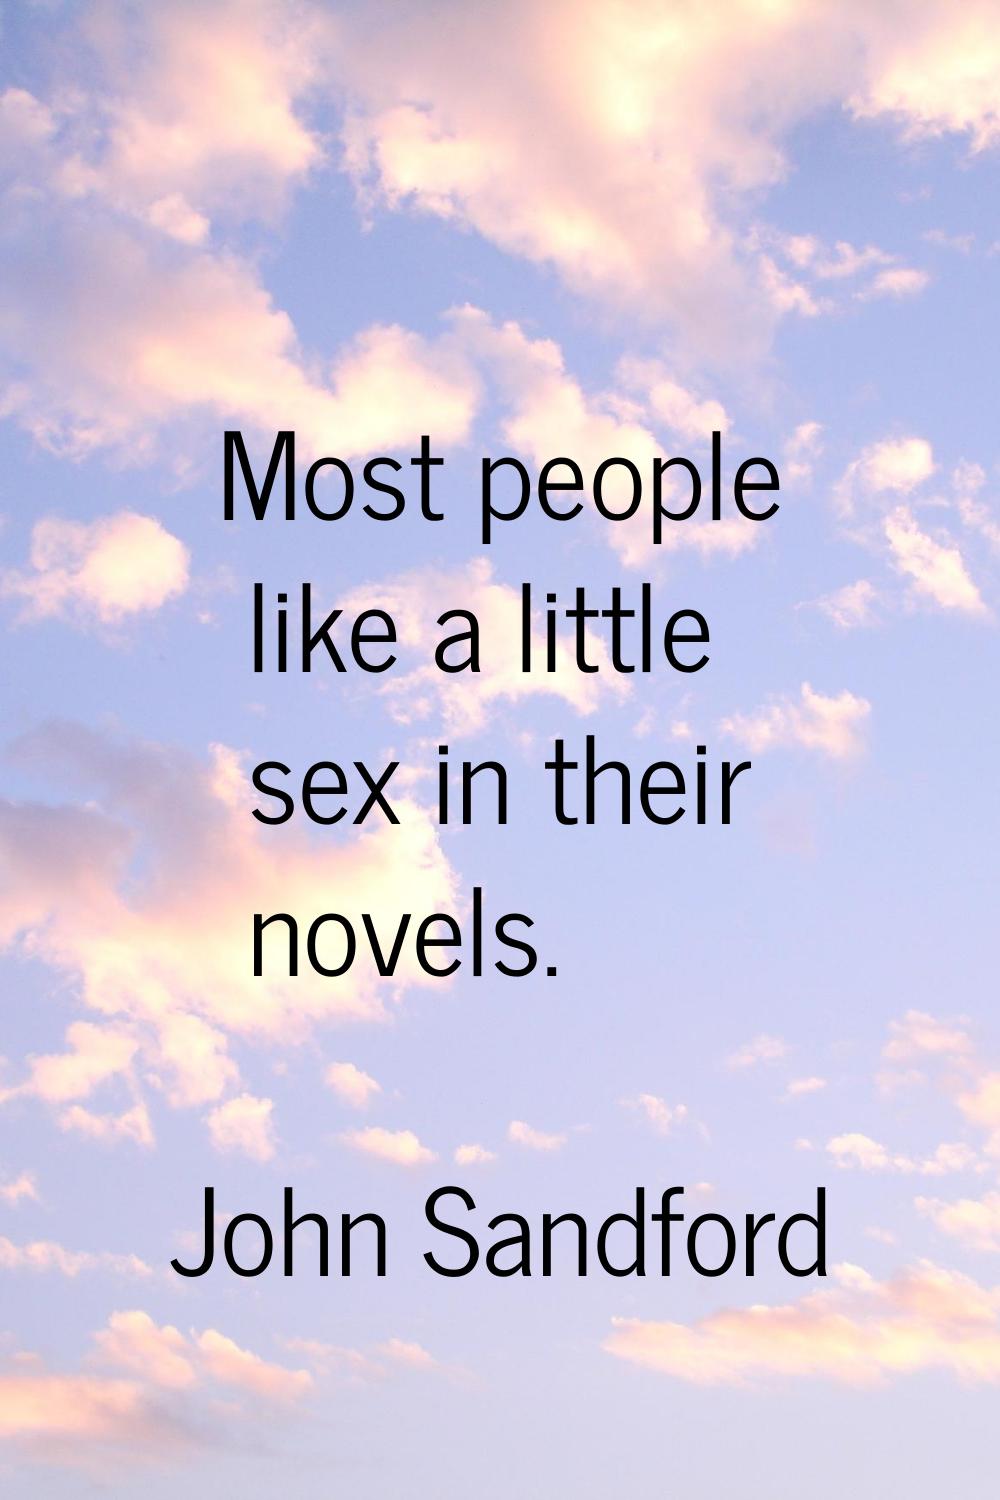 Most people like a little sex in their novels.